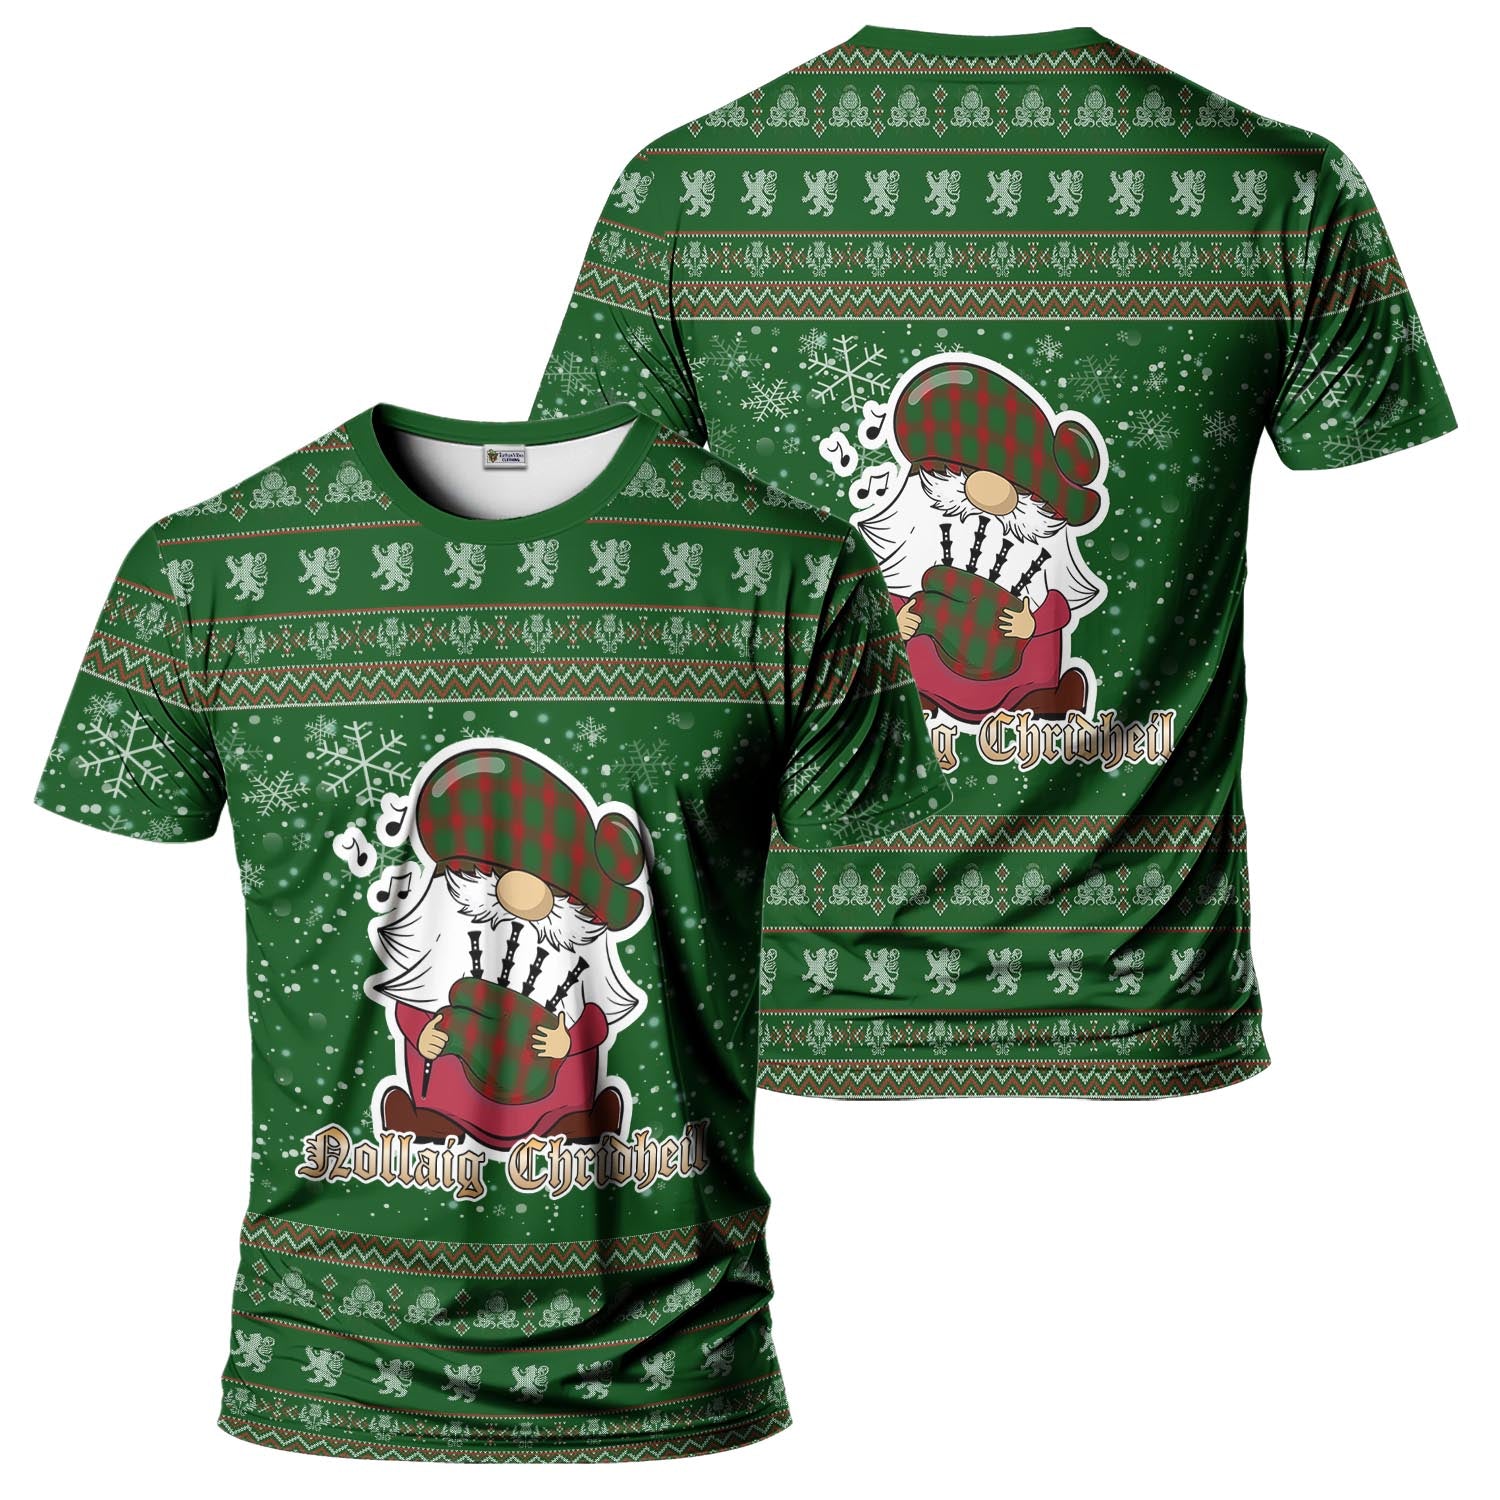 Middleton Clan Christmas Family T-Shirt with Funny Gnome Playing Bagpipes Men's Shirt Green - Tartanvibesclothing